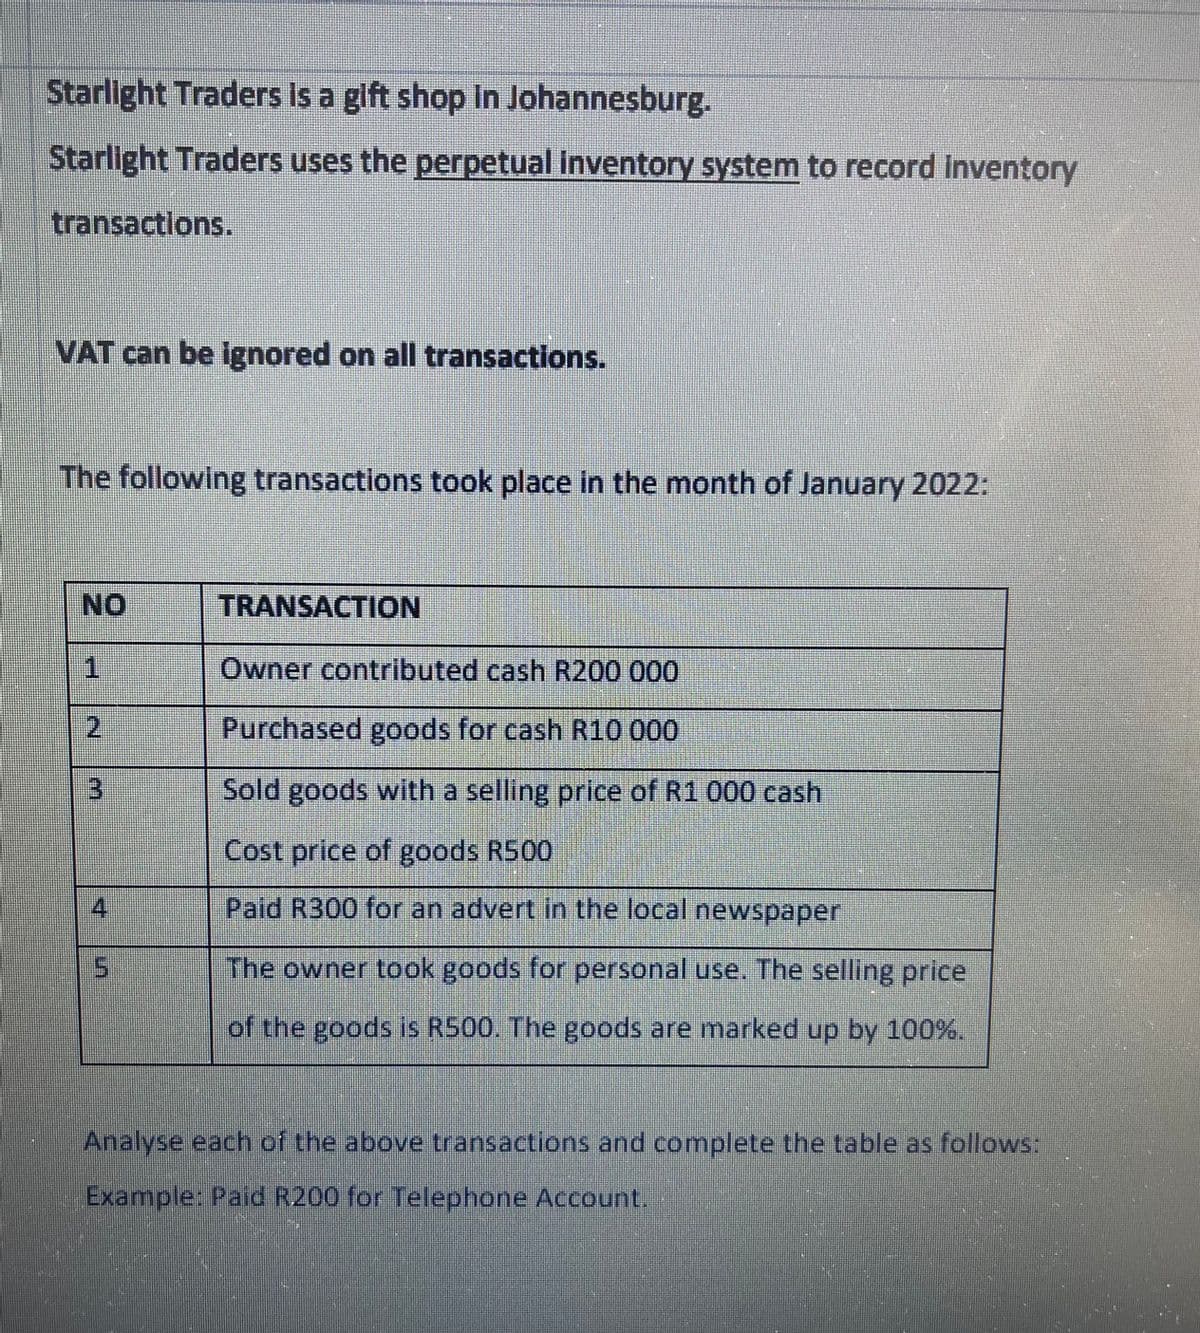 Starlight Traders is a gift shop in Johannesburg.
Starlight Traders uses the perpetual inventory system to record Inventory
transactions.
VAT can be ignored on all transactions.
The following transactions took place in the month of January 2022:
NO
1
2
LU
4
5
TRANSACTION
Owner contributed cash R200 000
Purchased goods for cash R10 000
Sold goods with a selling price of R1 000 cash
Cost price of goods R500
Paid R300 for an advert in the local newspaper
The owner took goods for personal use. The selling price
of the goods is R500. The goods are marked up by 100%.
Analyse each of the above transactions and complete the table as follows:
Example: Paid R200 for Telephone Account.